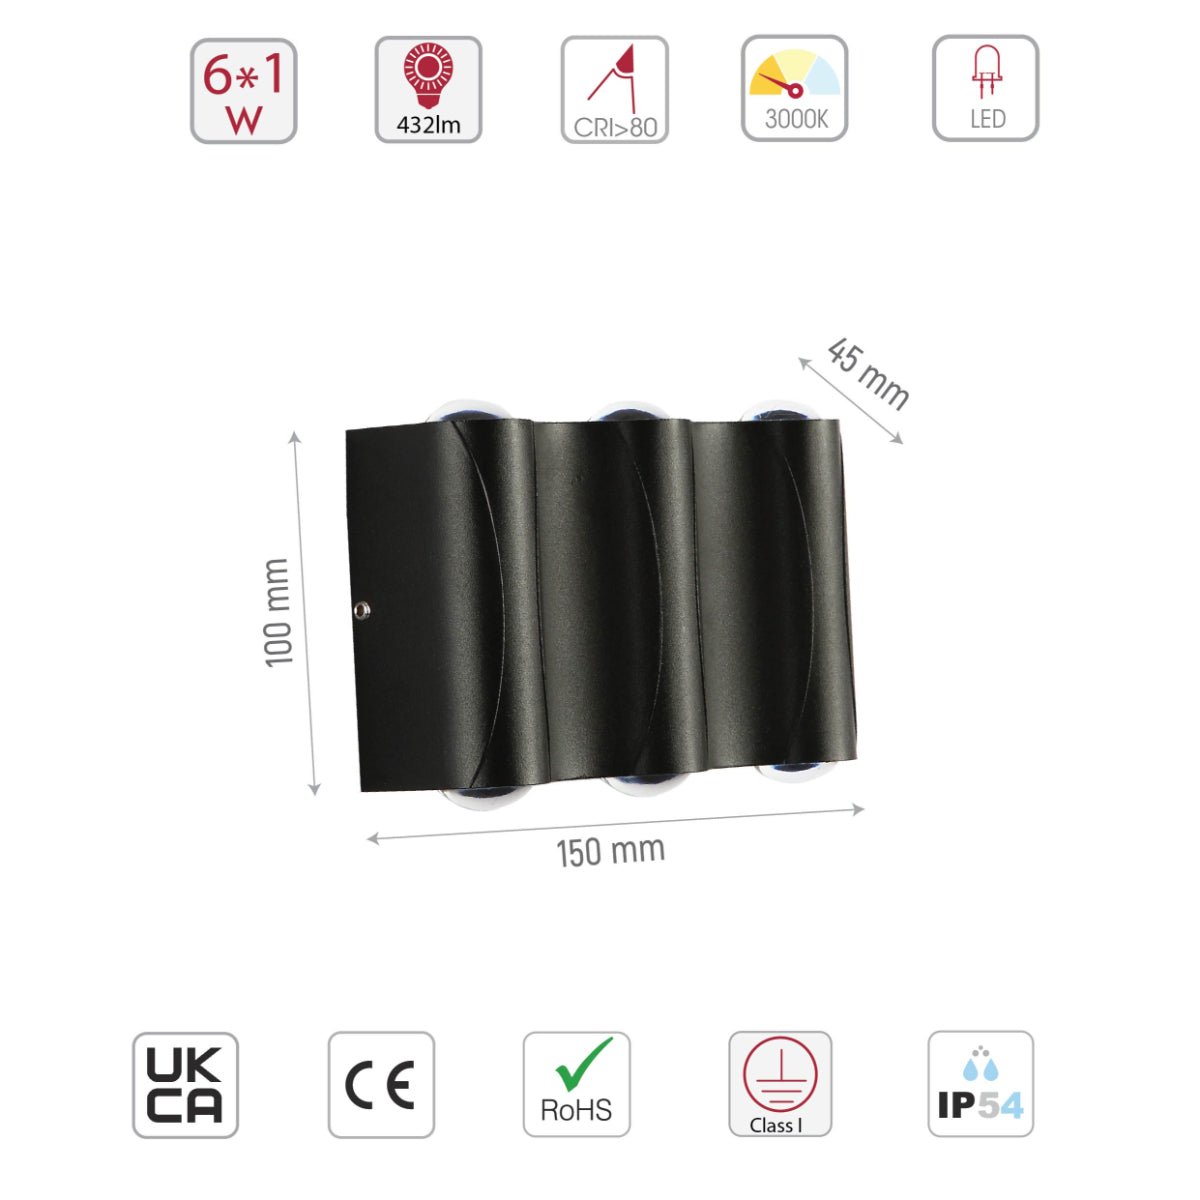 Size and specs of Black Corrugated Up Down Outdoor Modern LED Wall Light | TEKLED 183-03328